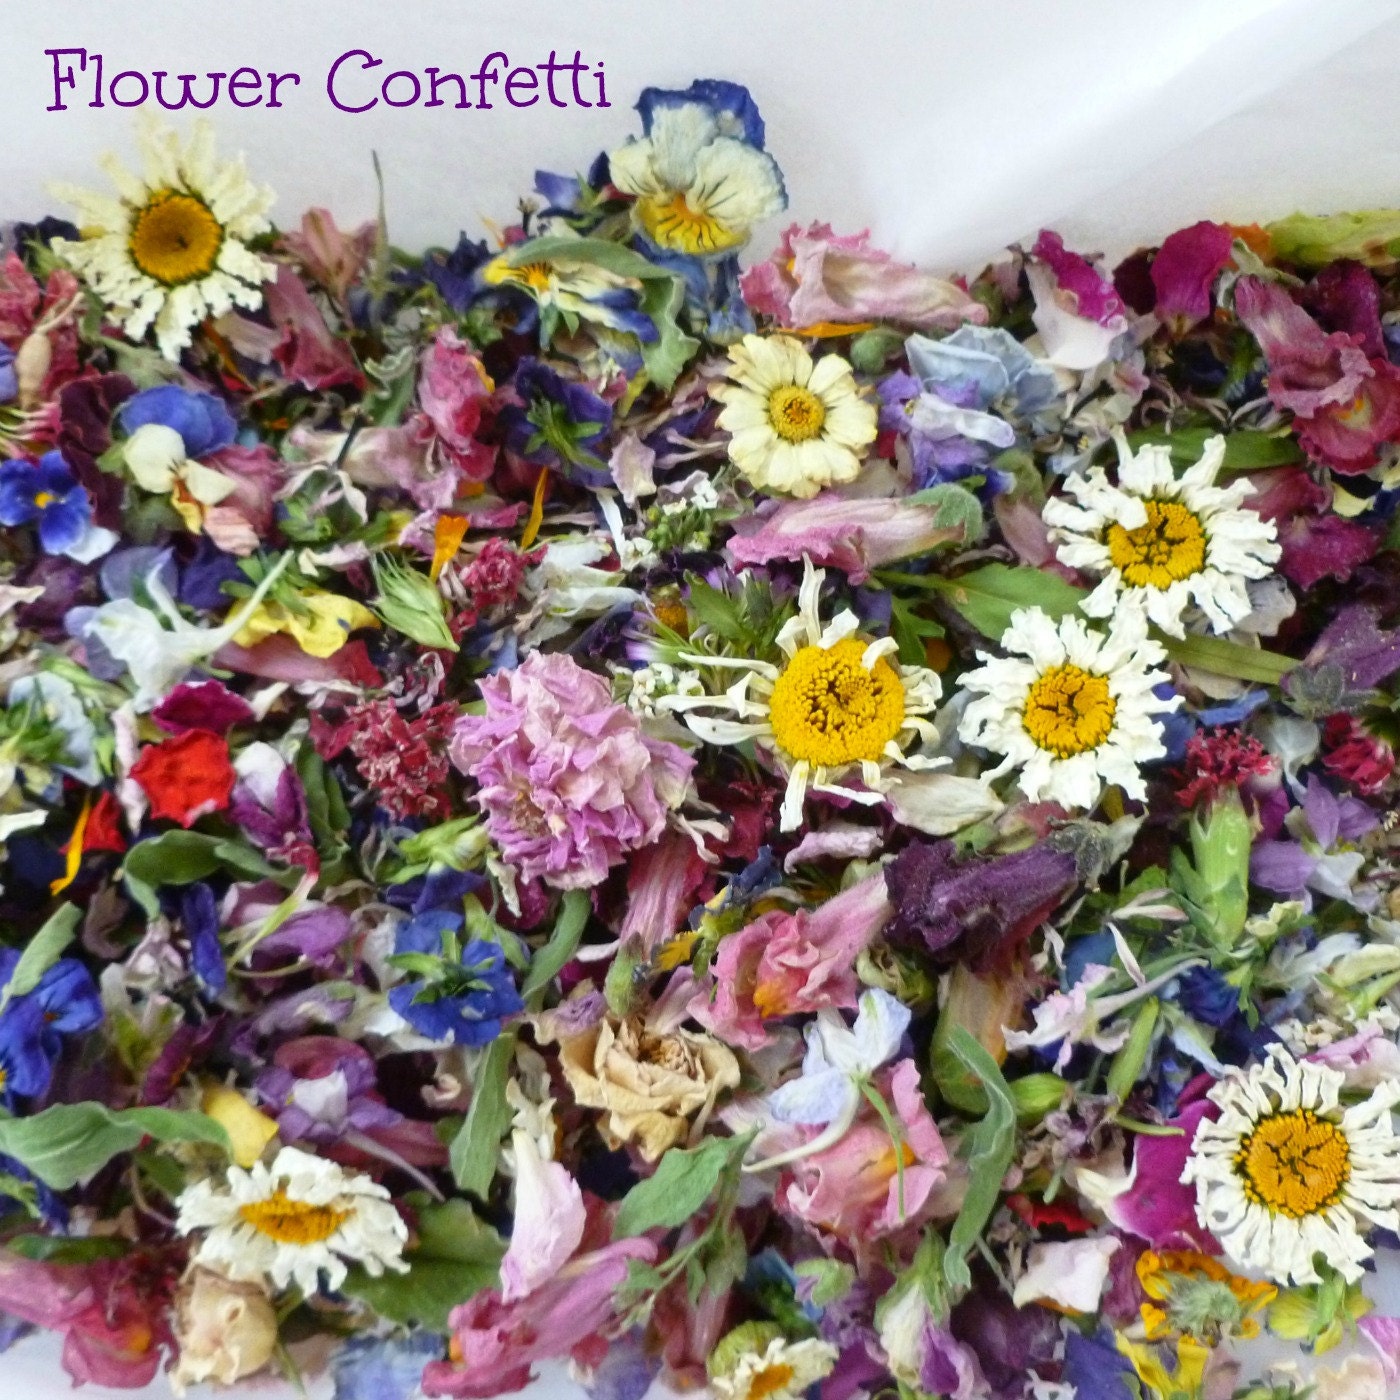 Pastel Flower Confetti, Wedding Confetti, Dried Flowers, Petal, Flower Petals, Petal Confetti, Decorations, Tossing Mix, Real Flowers, Table